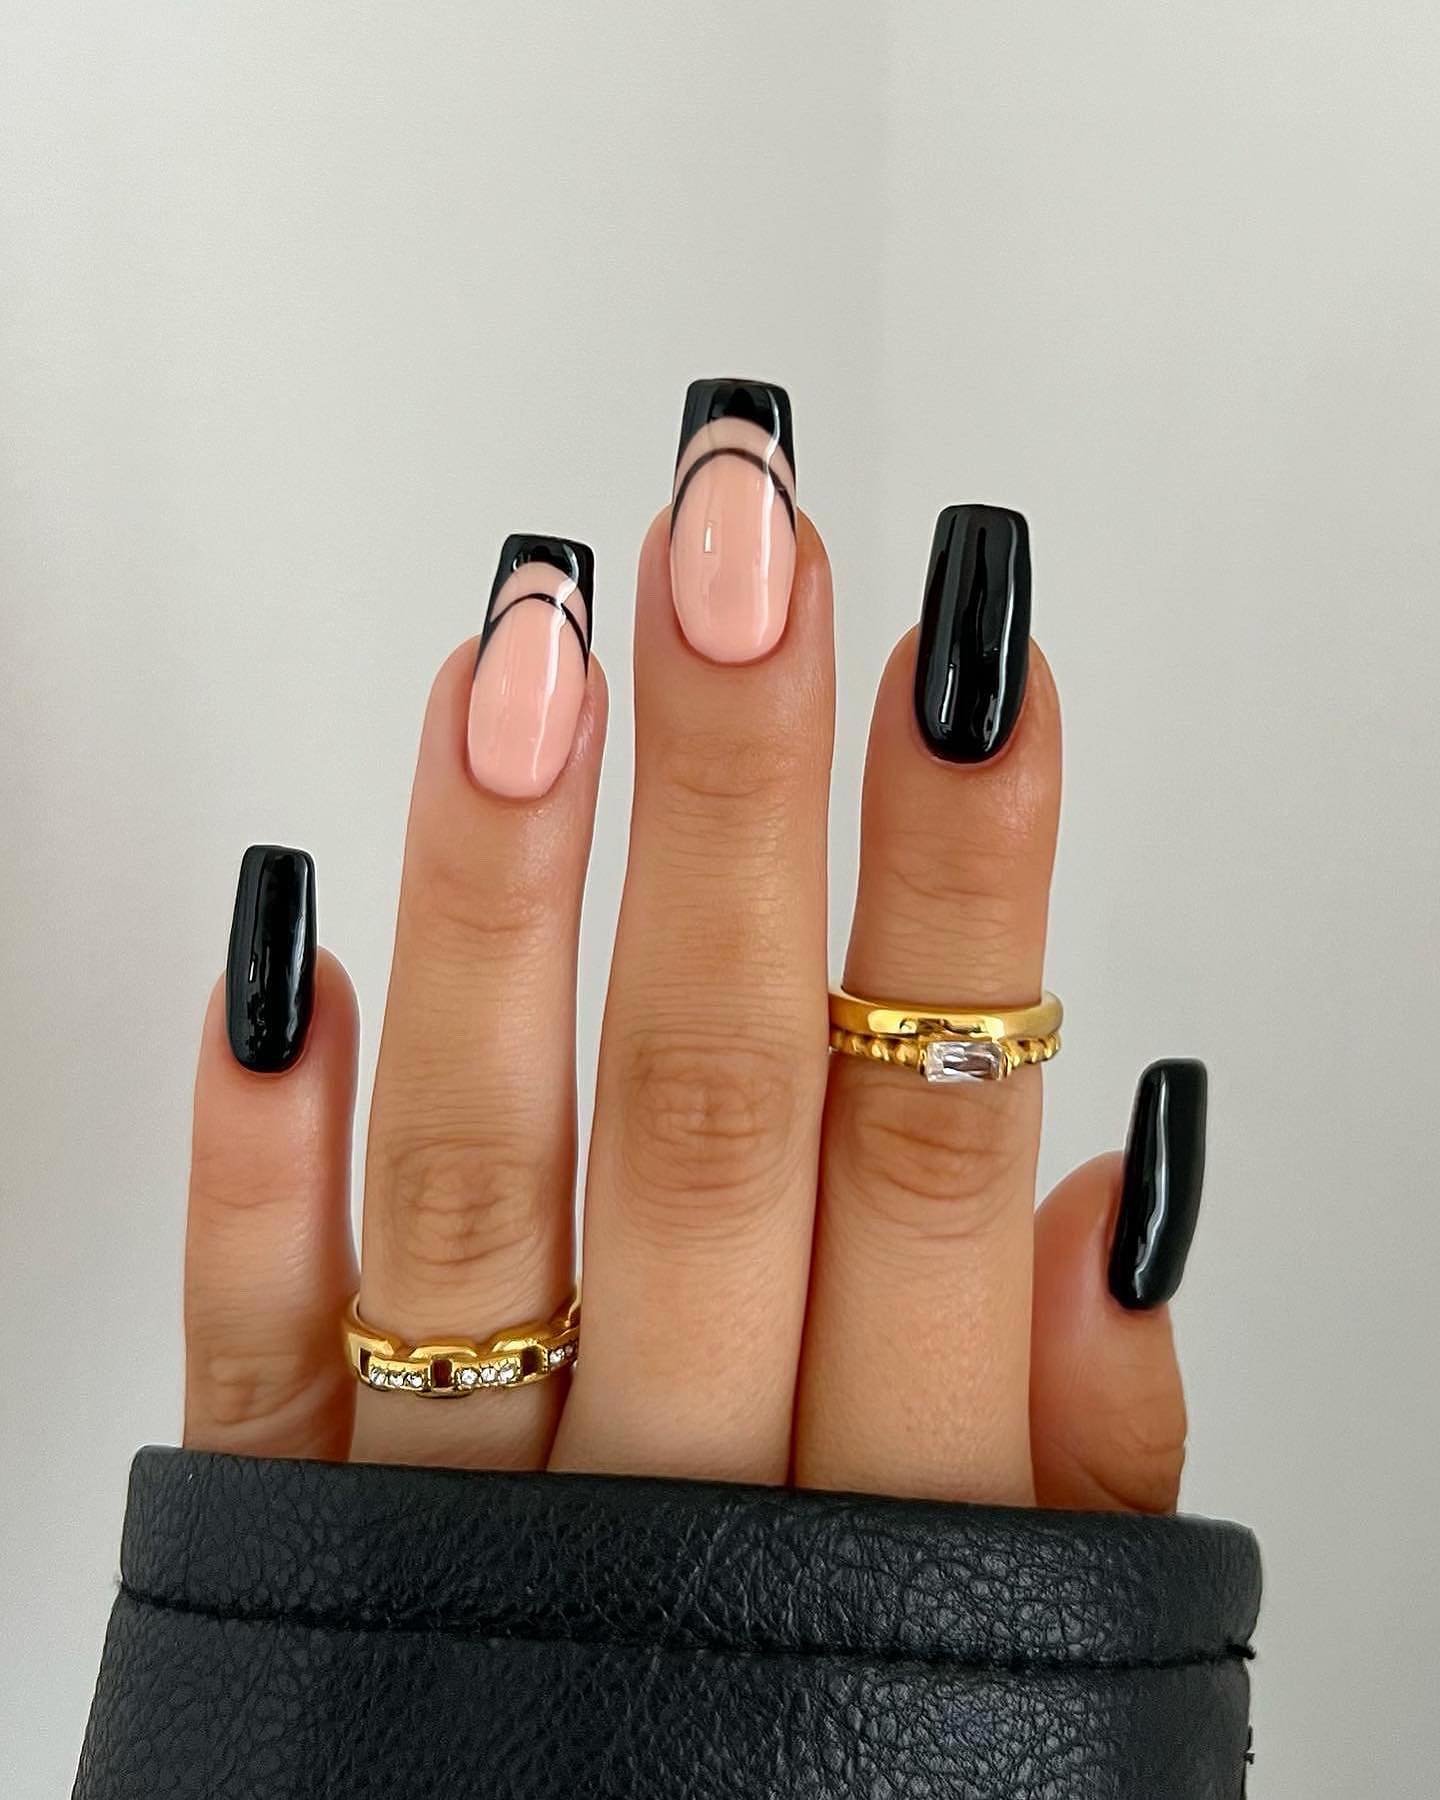 32 - Picture of Black Nails